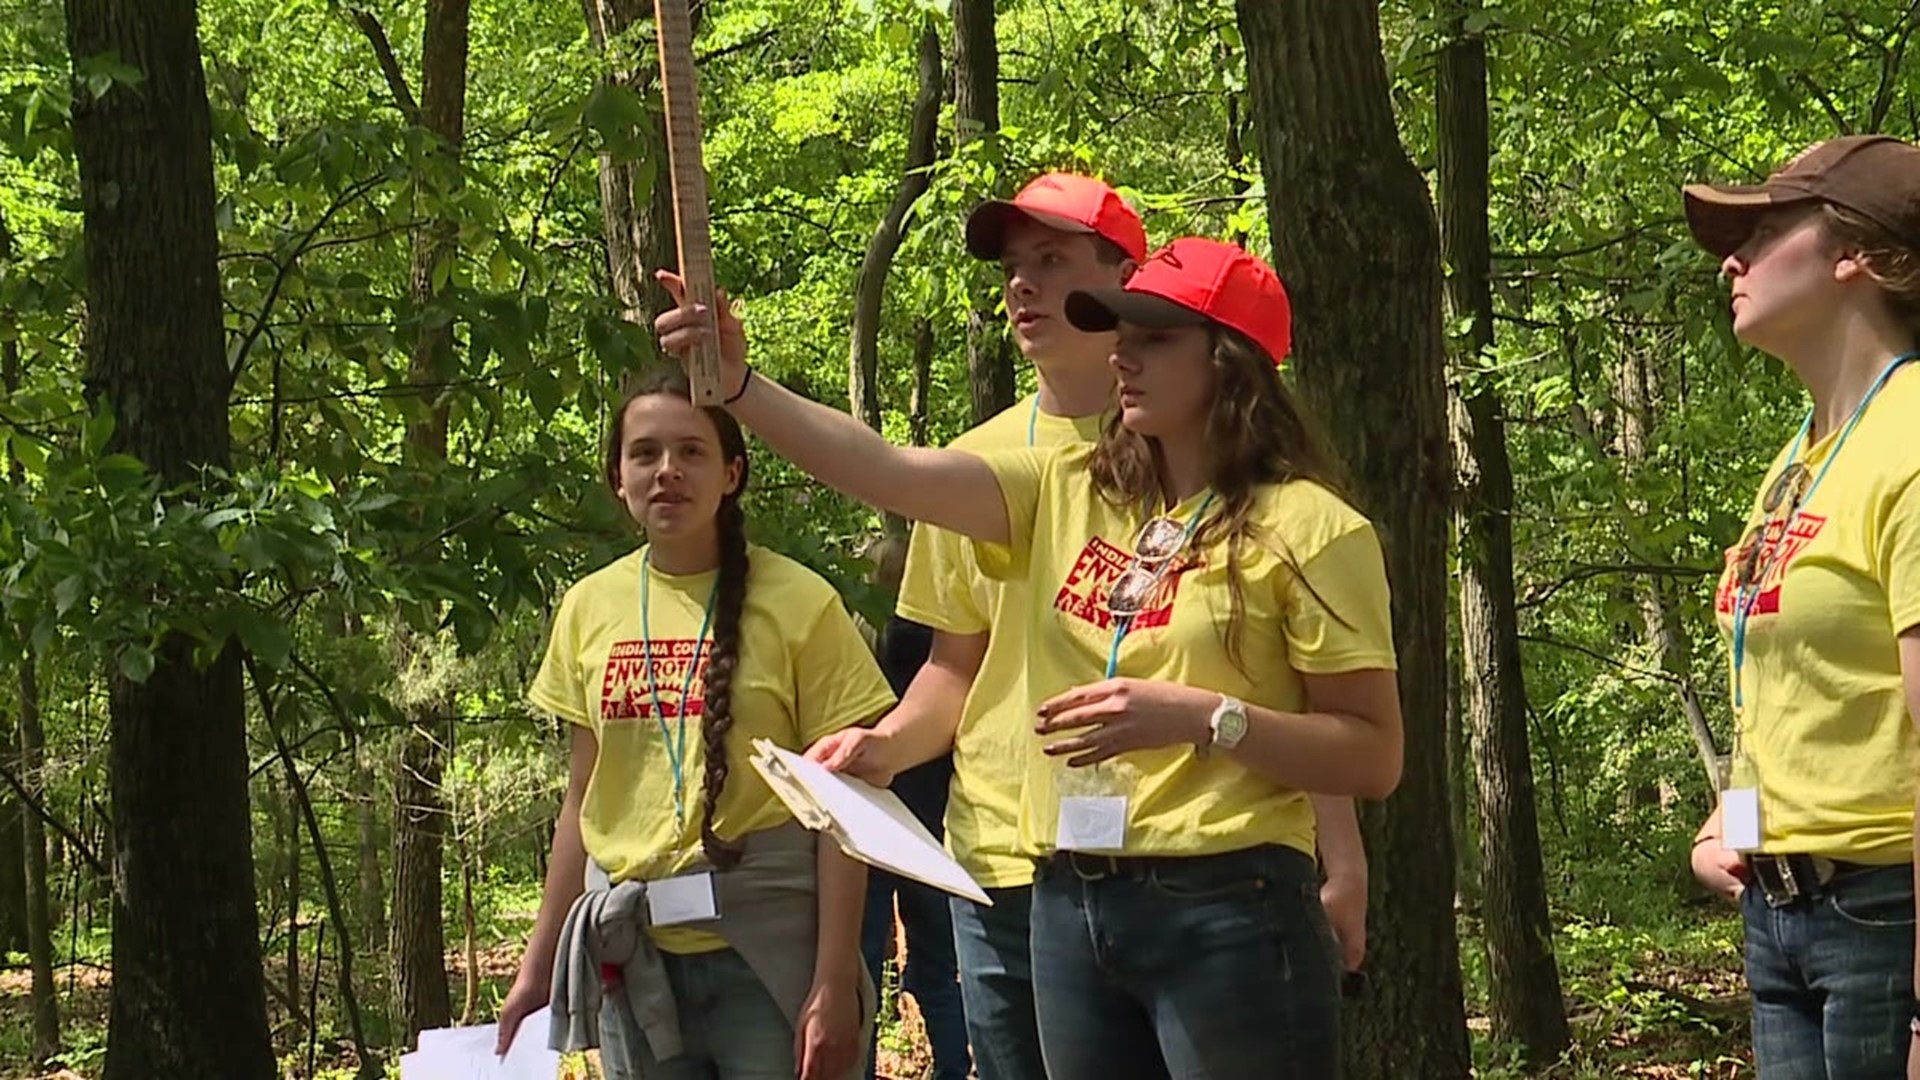 Students from 62 school districts competed for scholarship money during the outdoor event.